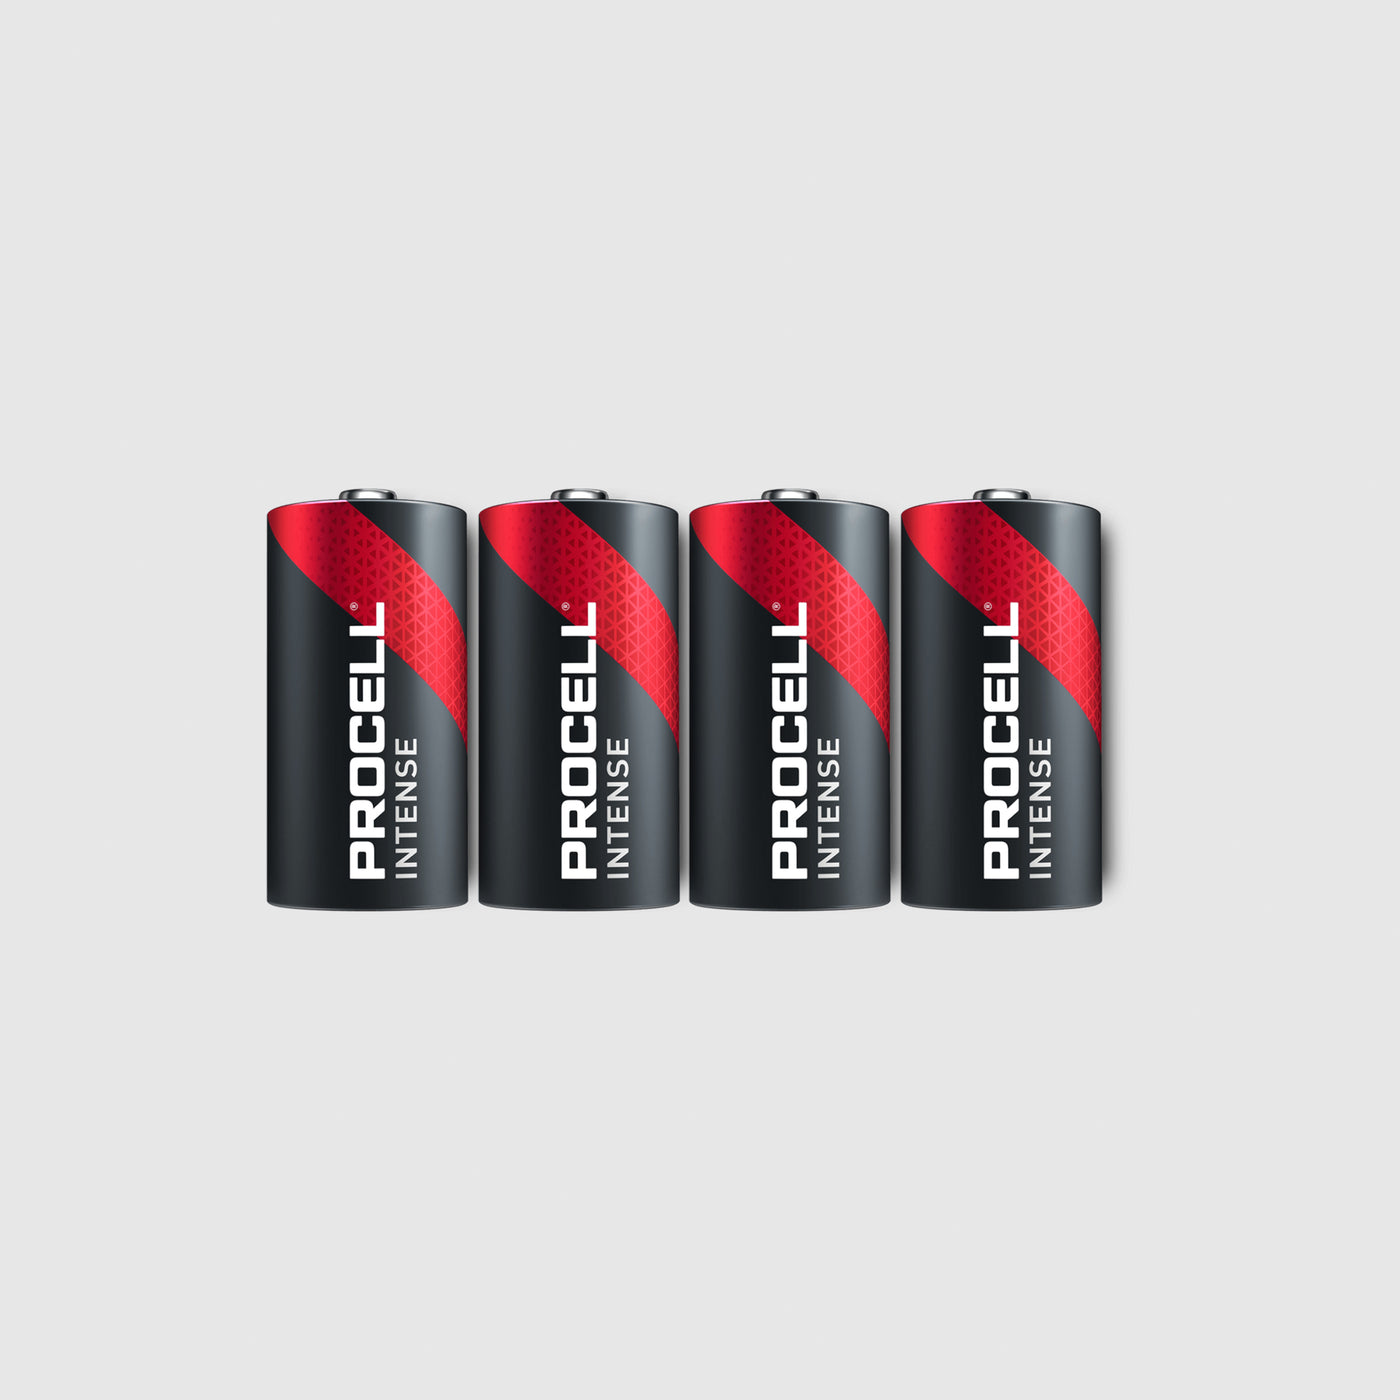 Procell Intense Power C Size Batteries (4 Pack)